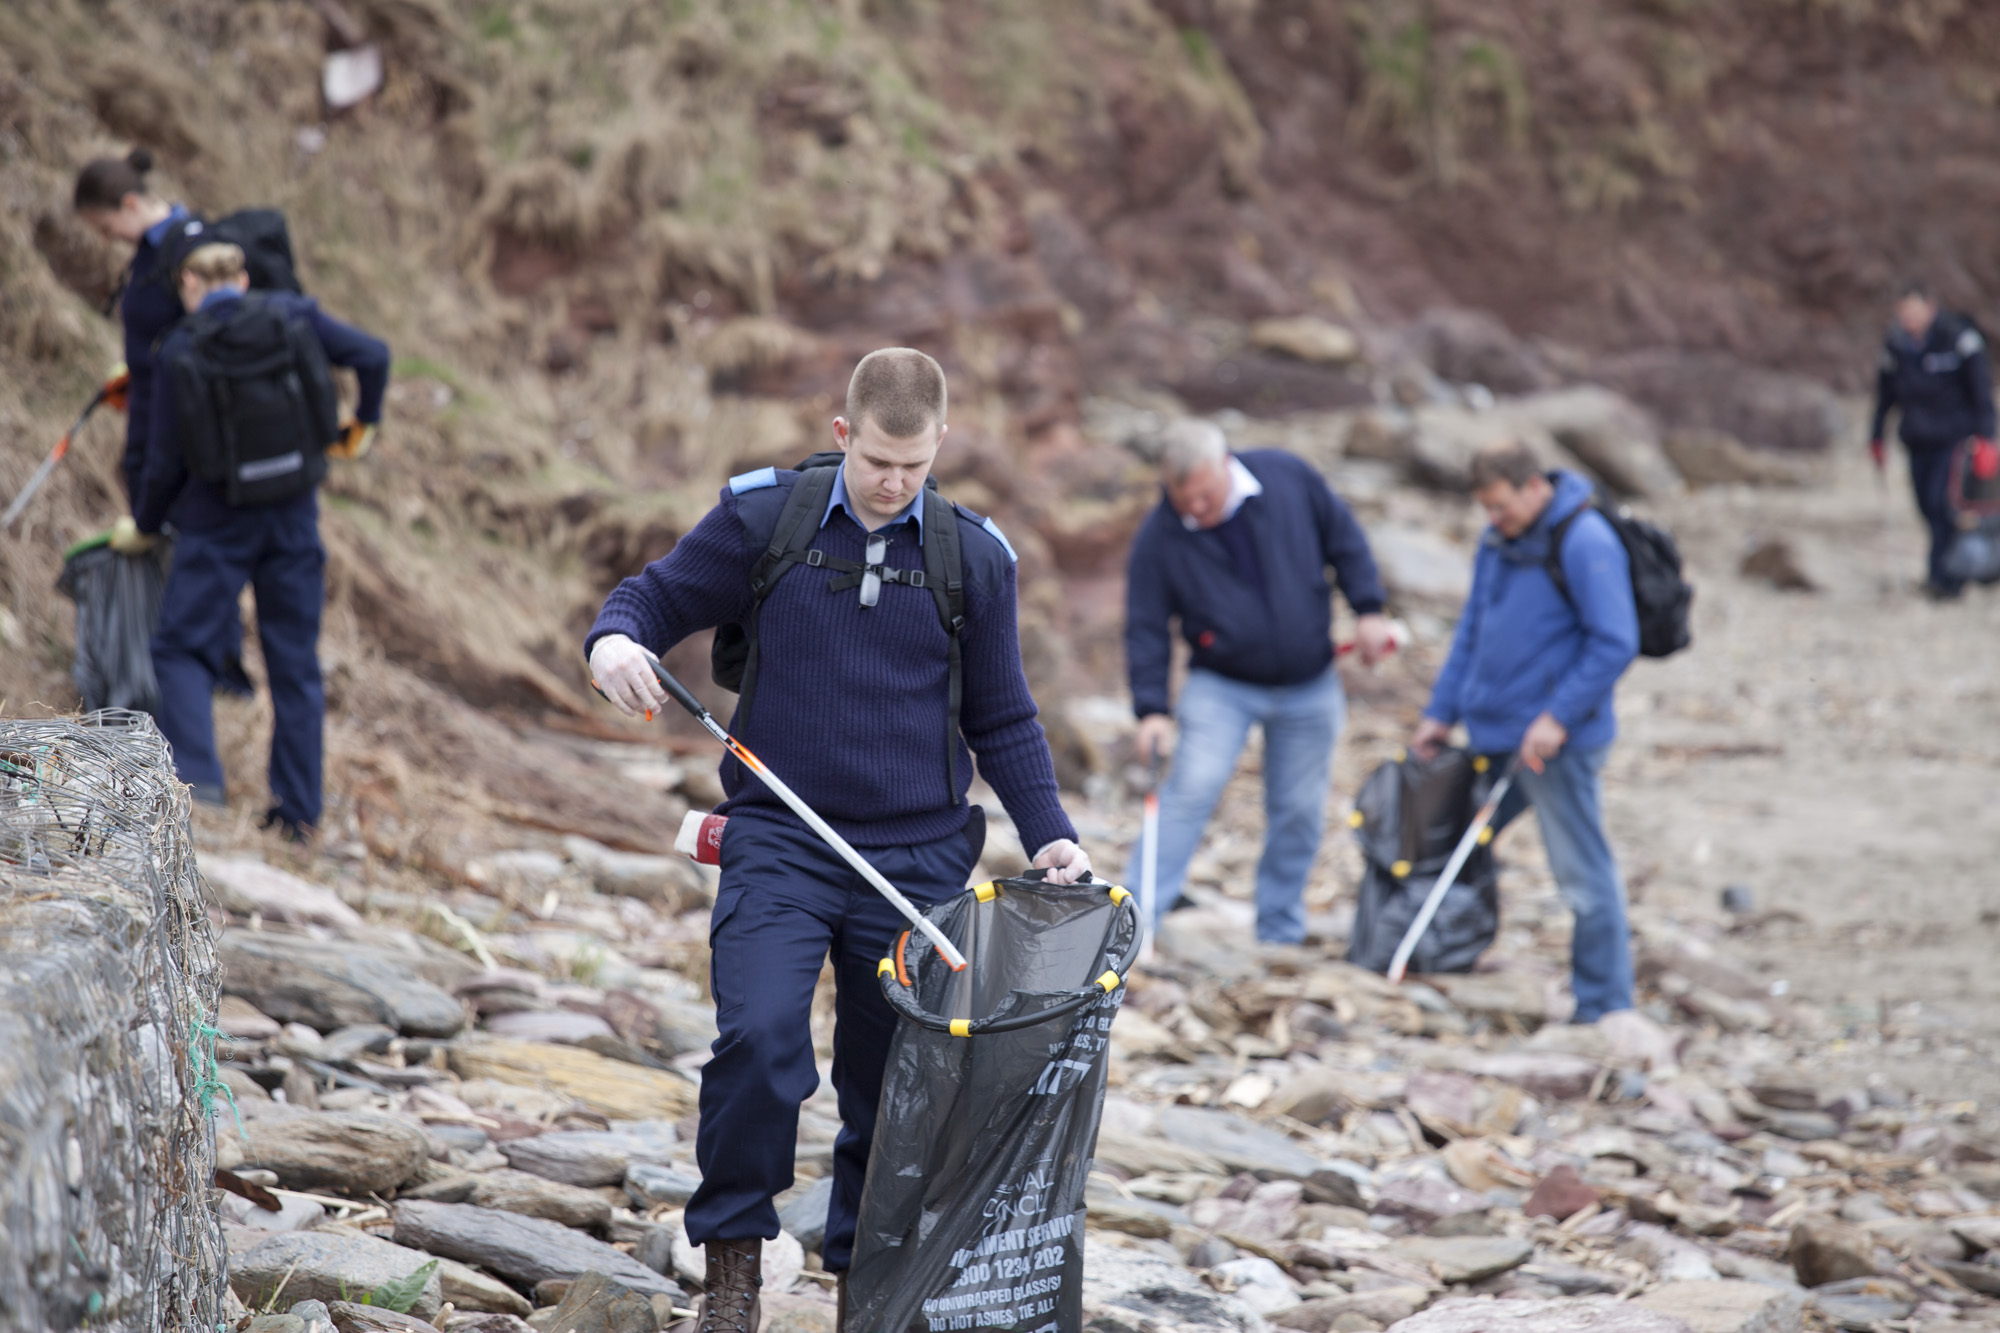 An image of a group of people collecting litter on a pebble beach